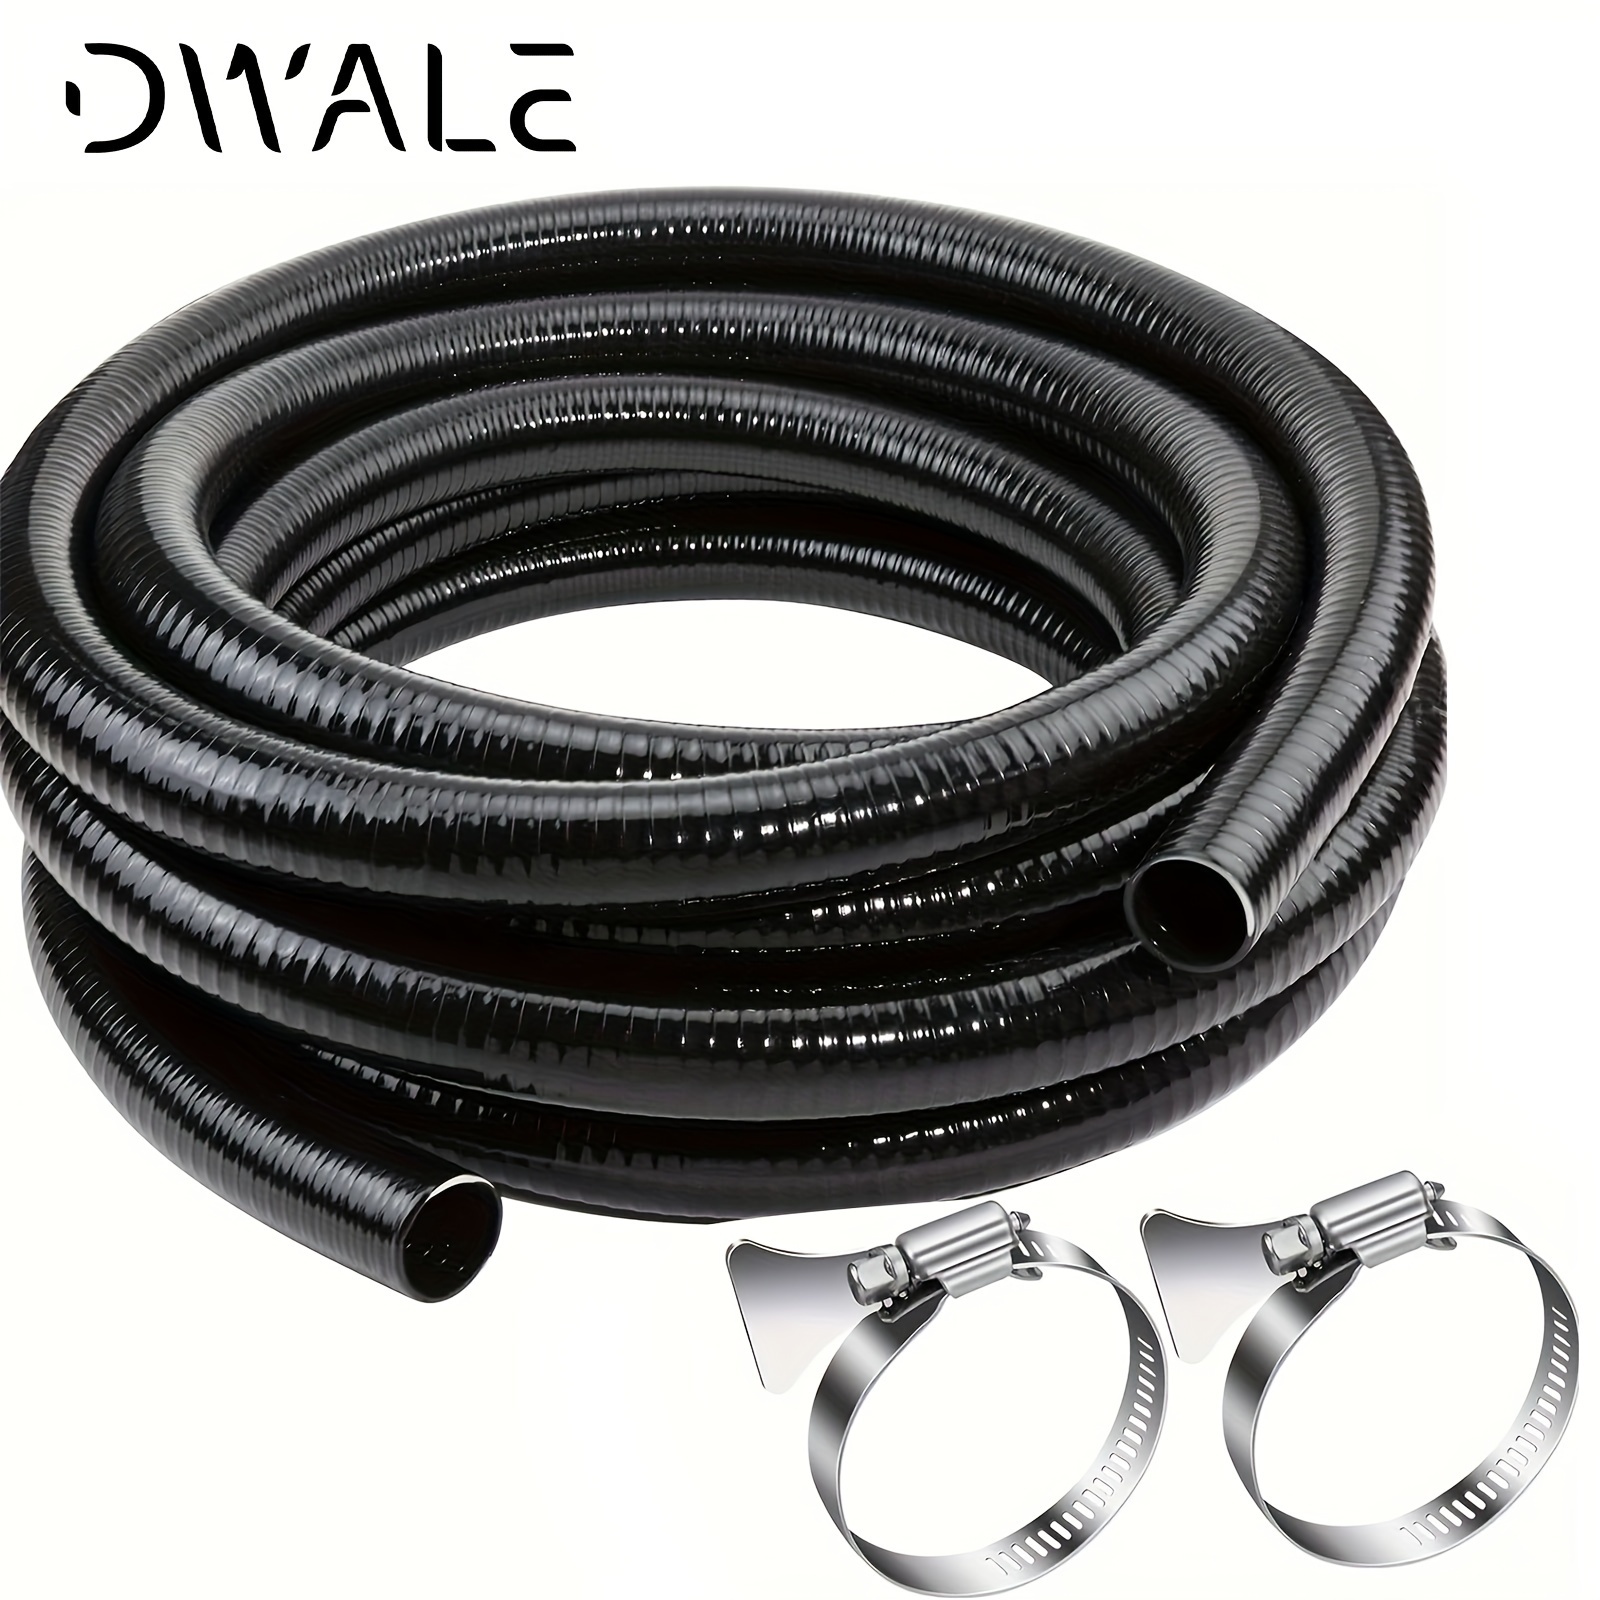 

Flexible Pvc Pipe1.5" Dia Black Pvc Pipe, 1.5" X50 Feet Pool Hose, Spa Hose Tubing For Koi Ponds, Pond Tubing, Irrigation And Water Gardens, With 2pcs Stainless Steel Clamps